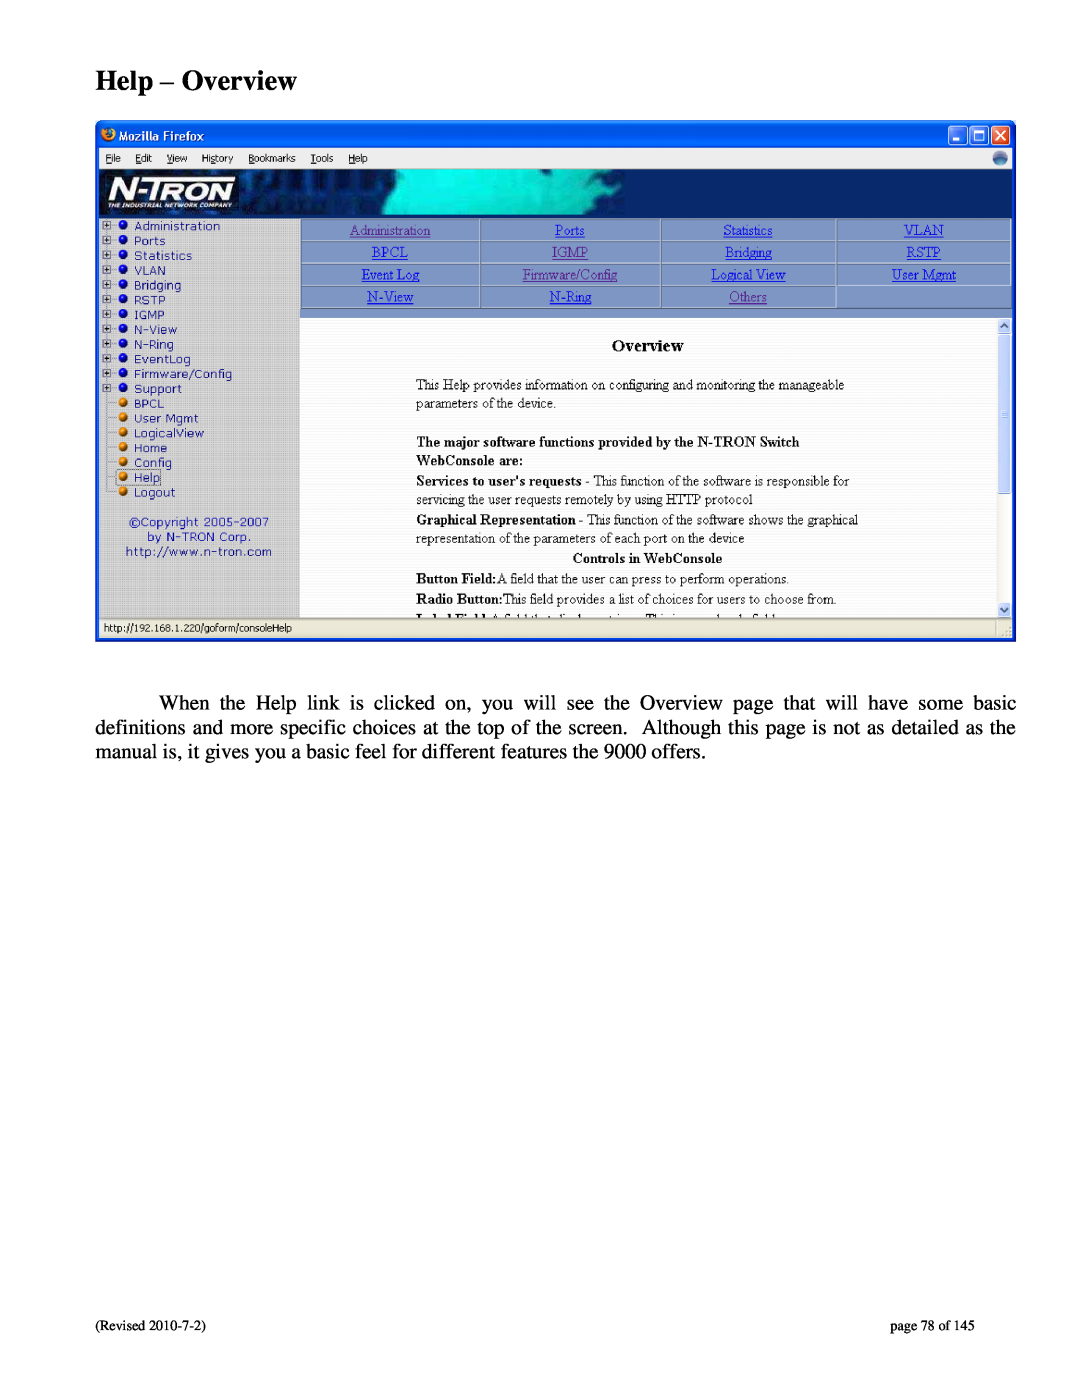 N-Tron 9000 user manual Help - Overview, page 78 of 